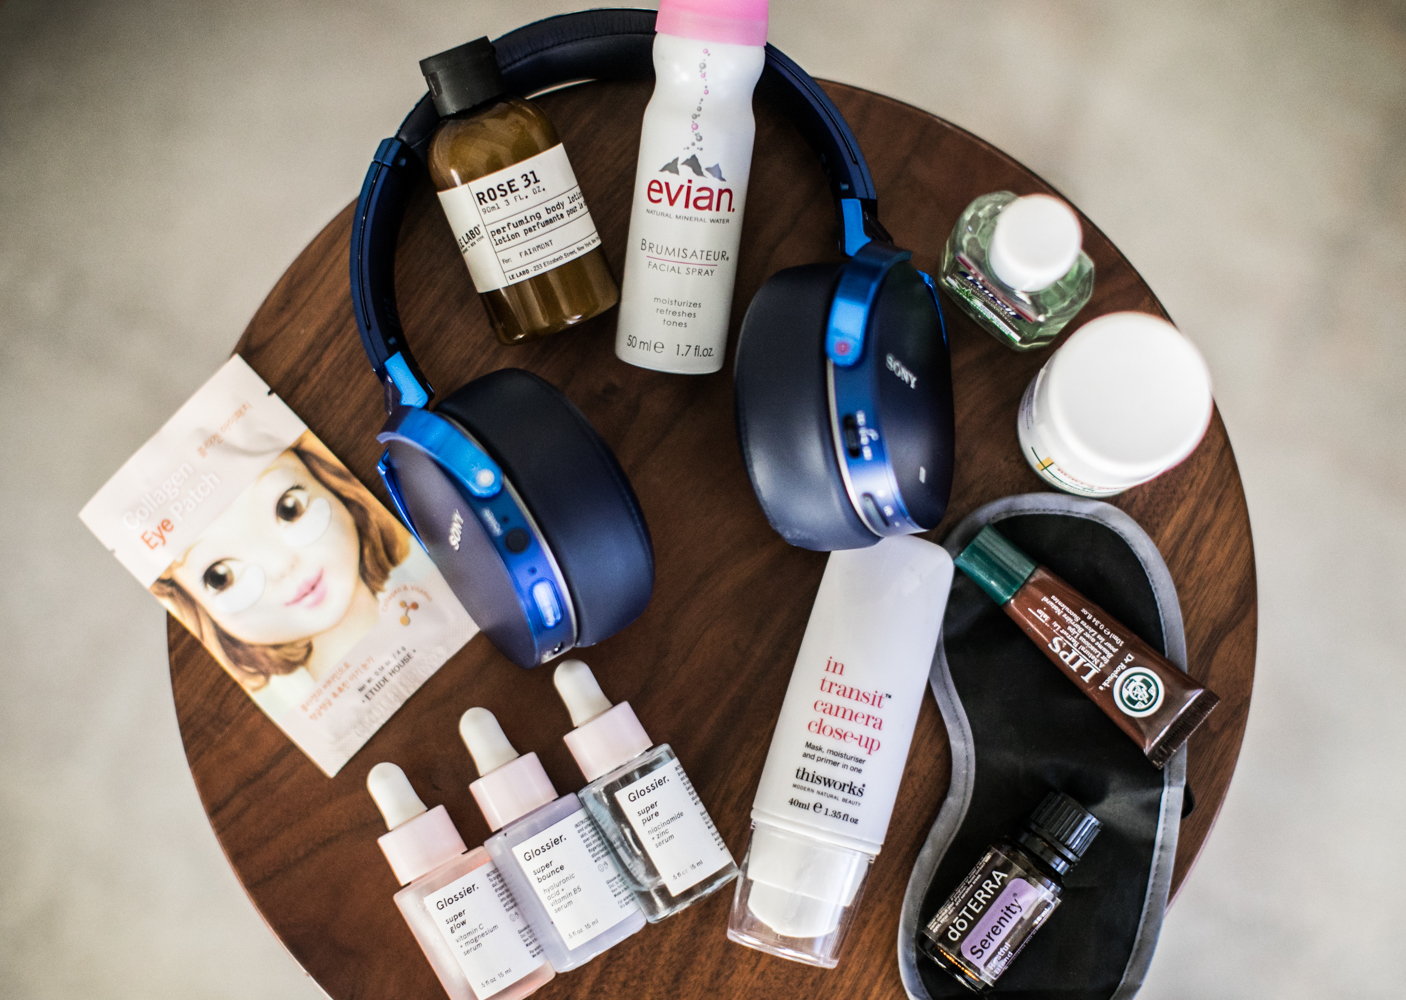 Xenia's Fav Beauty Products for traveling & long flights.